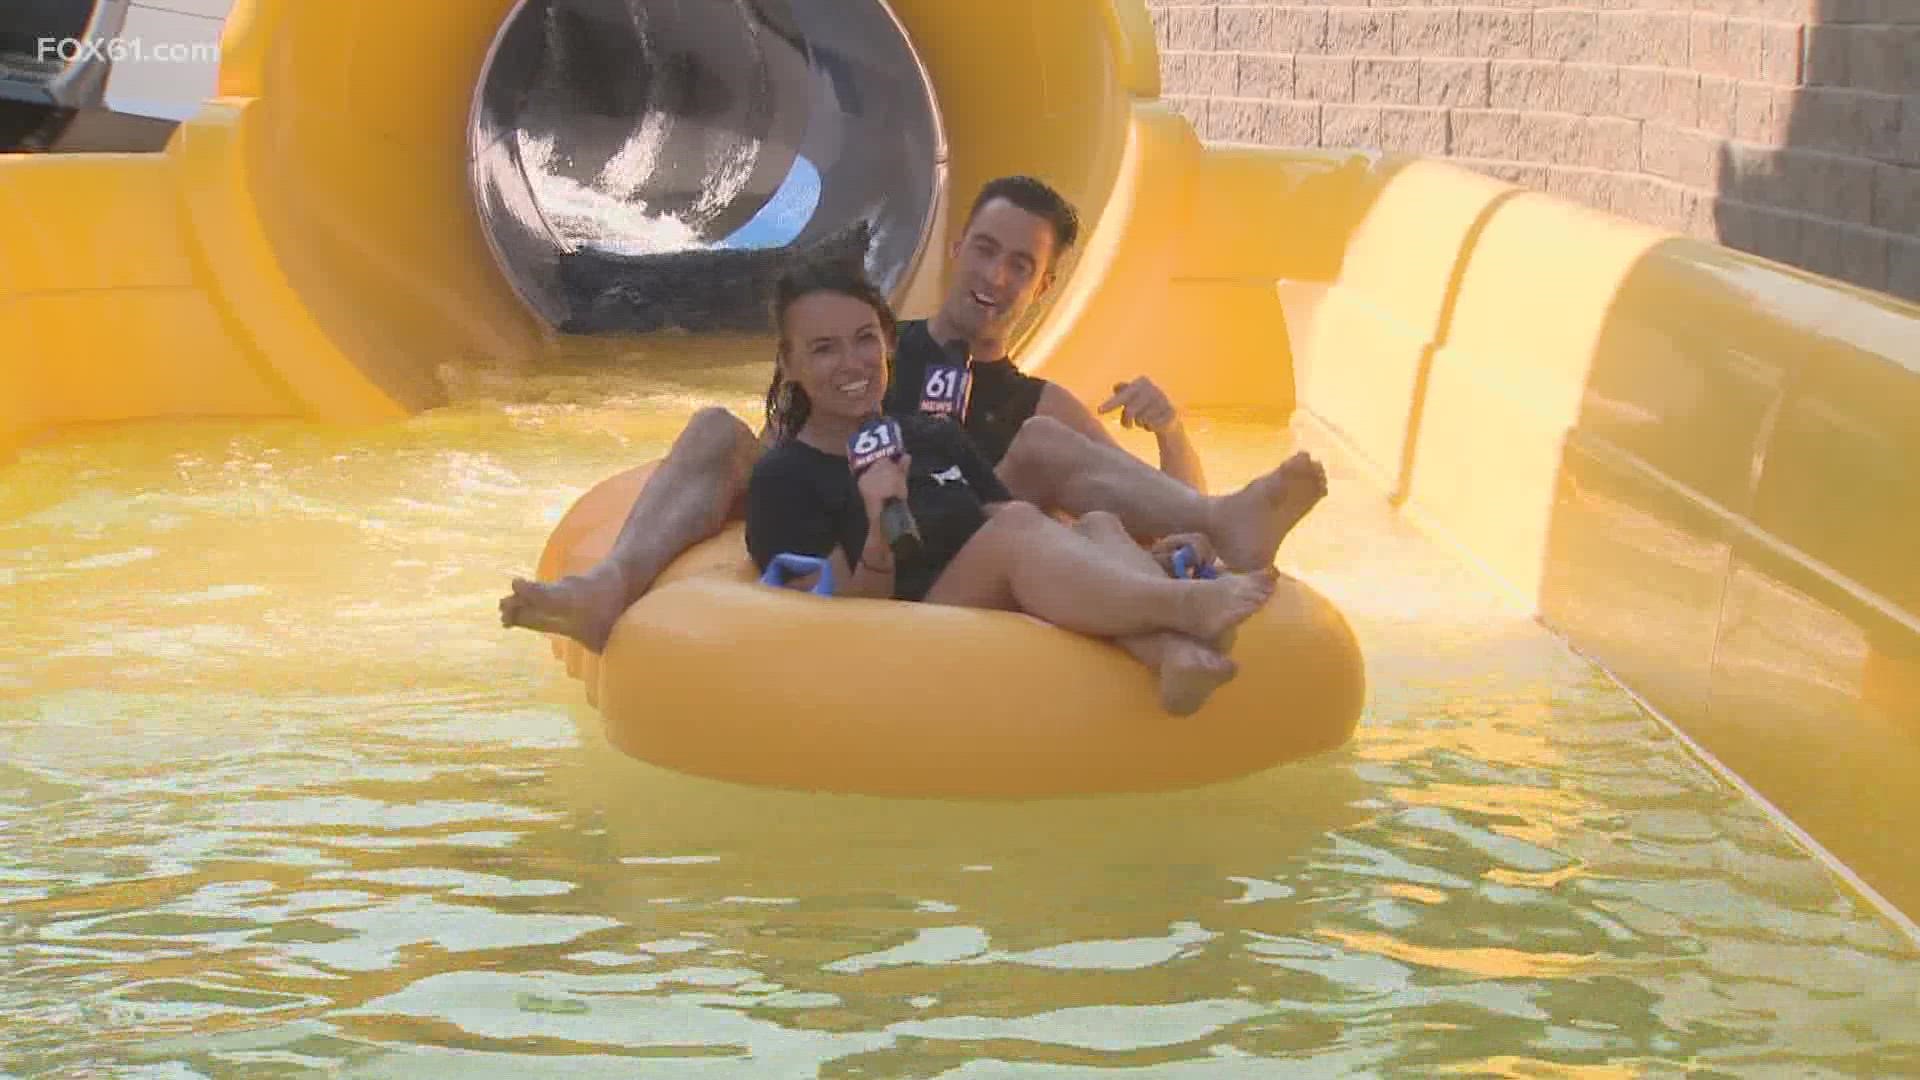 The new Rocket Rapid water slide is available for families to ride all summer.